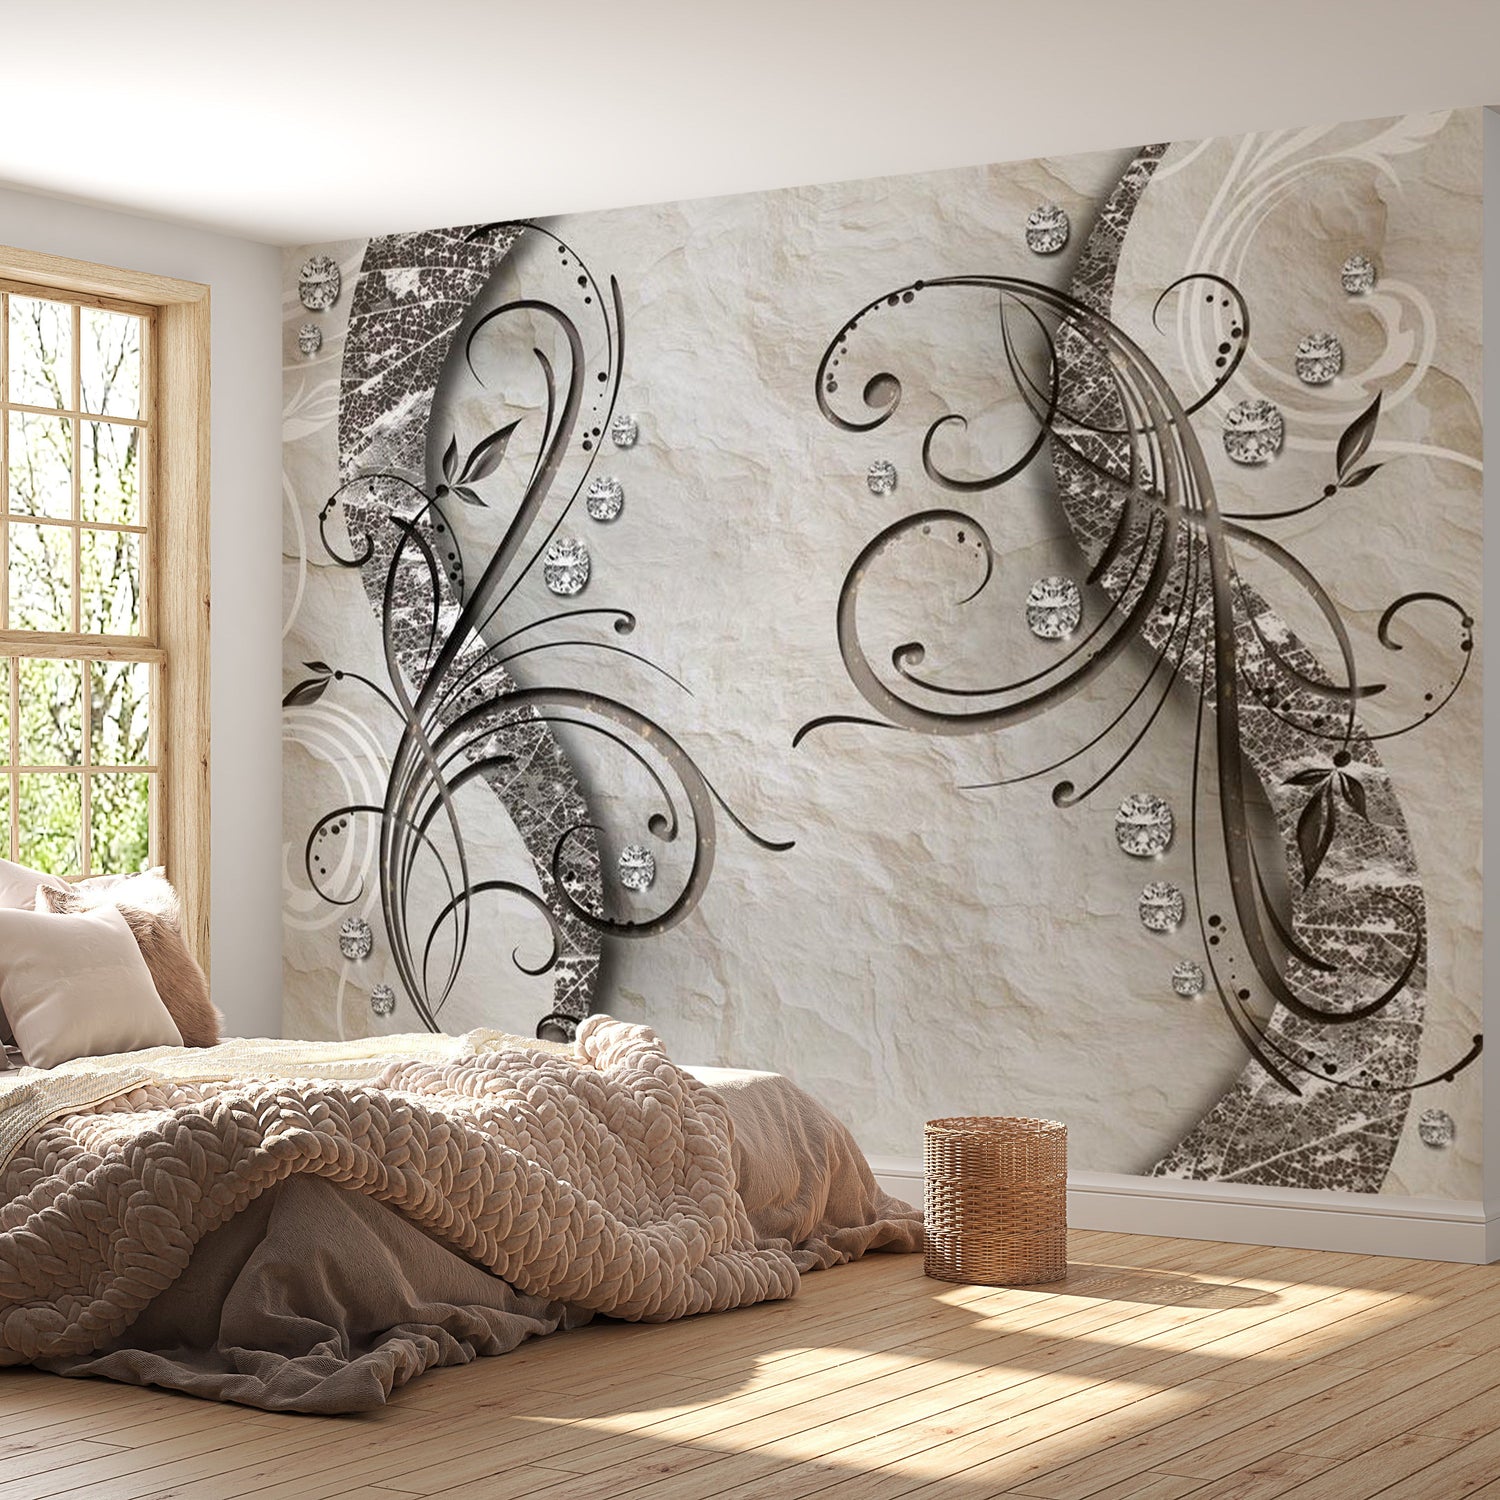 Peel & Stick Glam Wall Mural - Diamond Trail - Removable Wall Decals